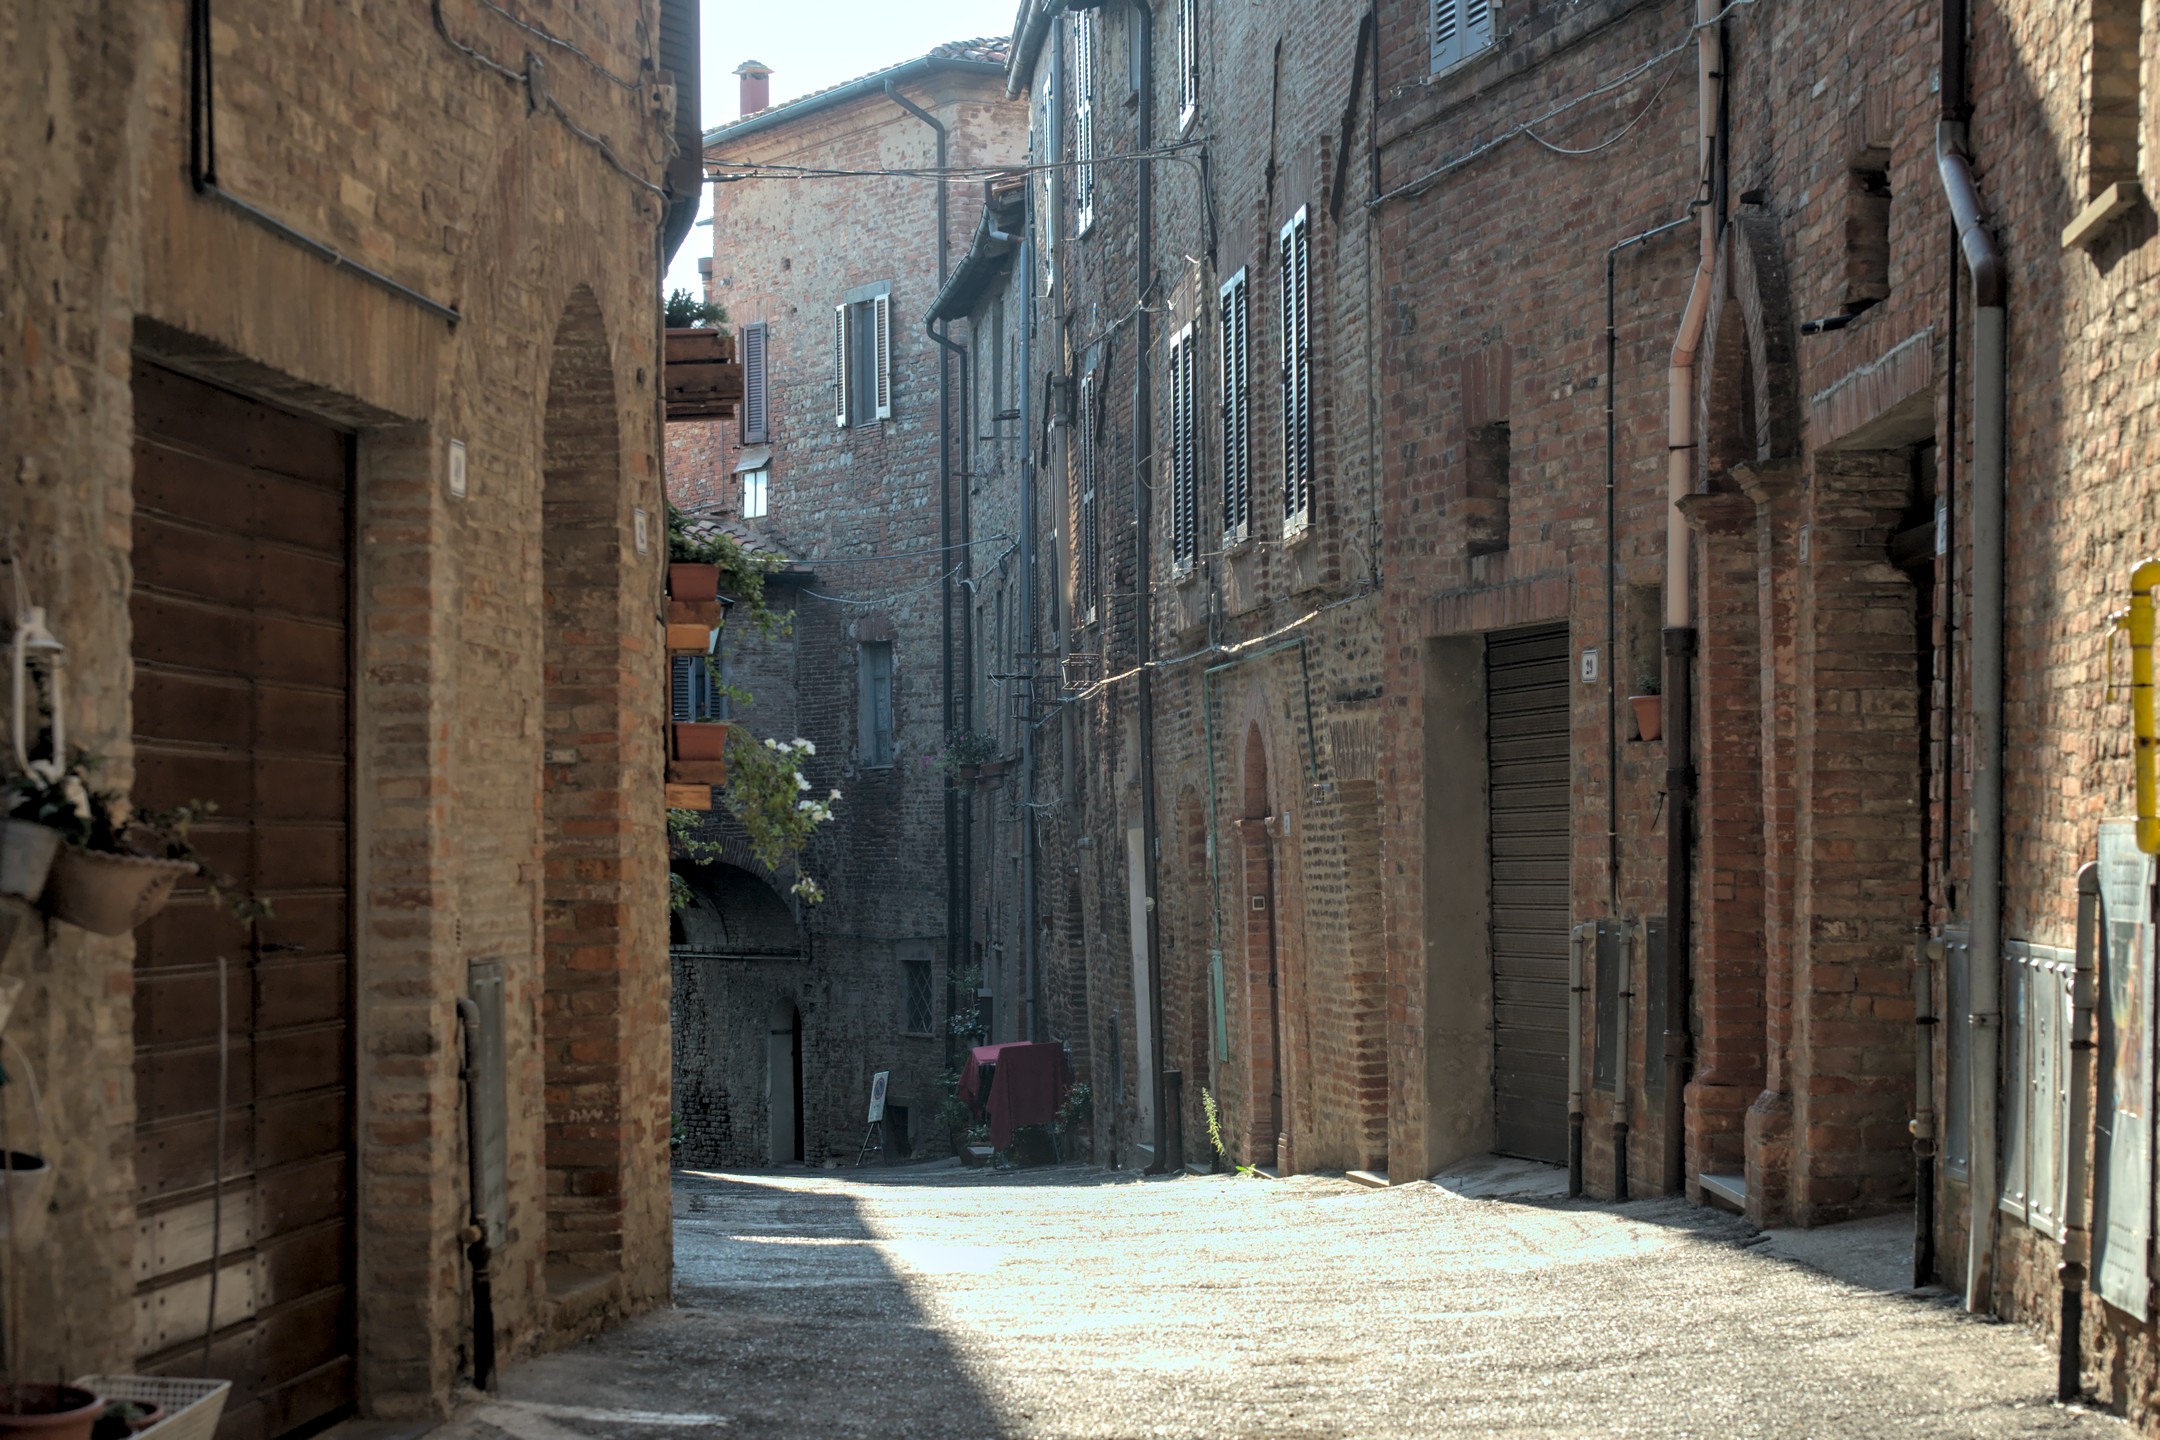 Umbrian Alley 2...